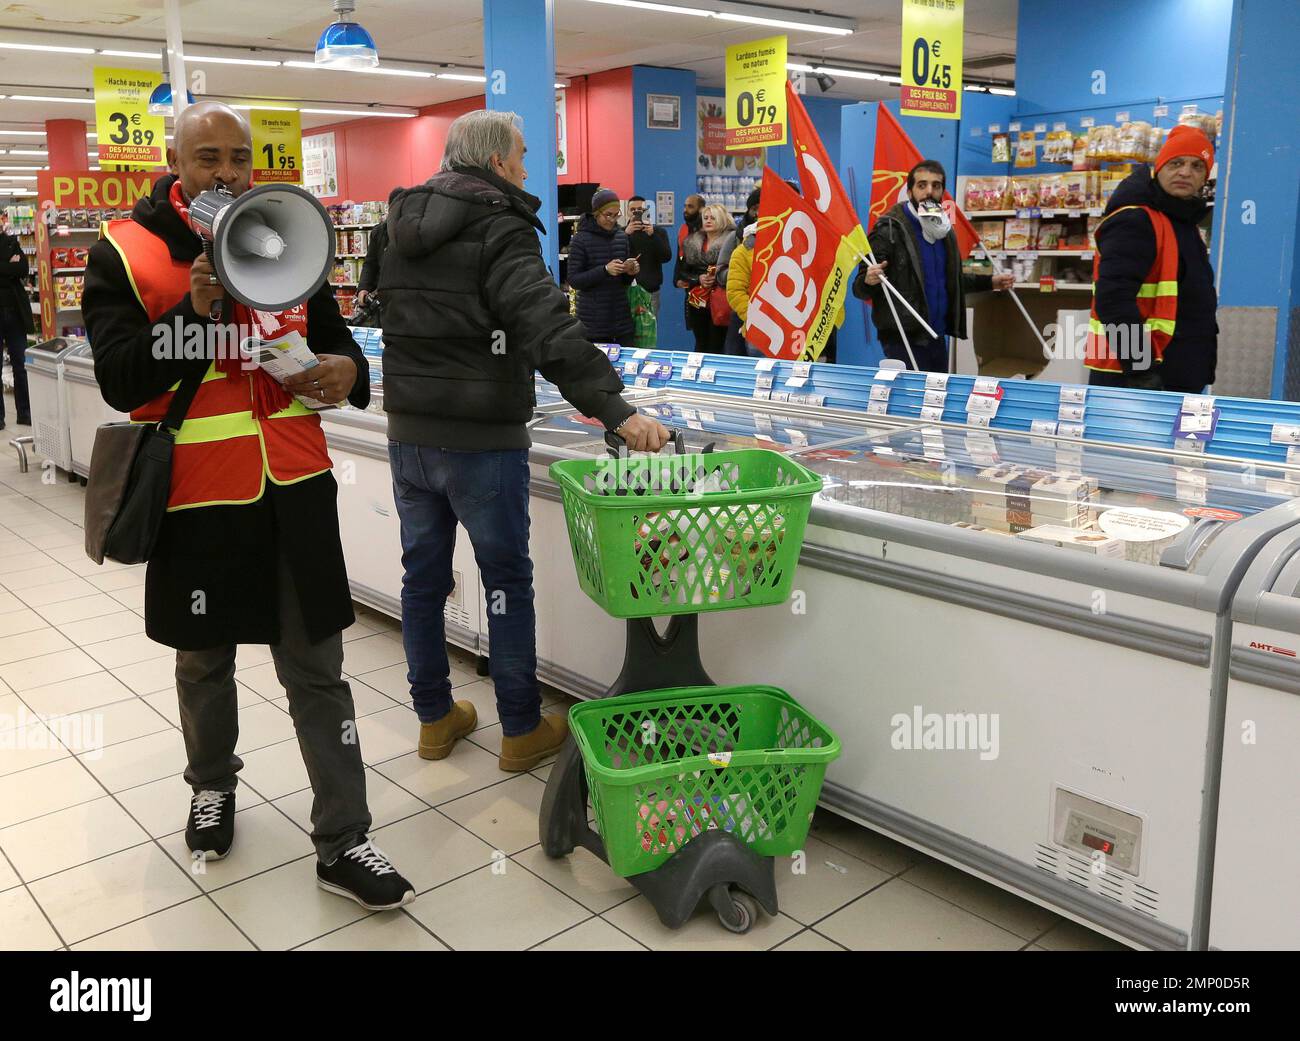 A man pulls his trolley as employees of French retail giant Carrefour Group  demonstrate against job cuts with union flags inside a Carrefour store, in  Marseille, southern France, Friday, Feb. 9, 2018.